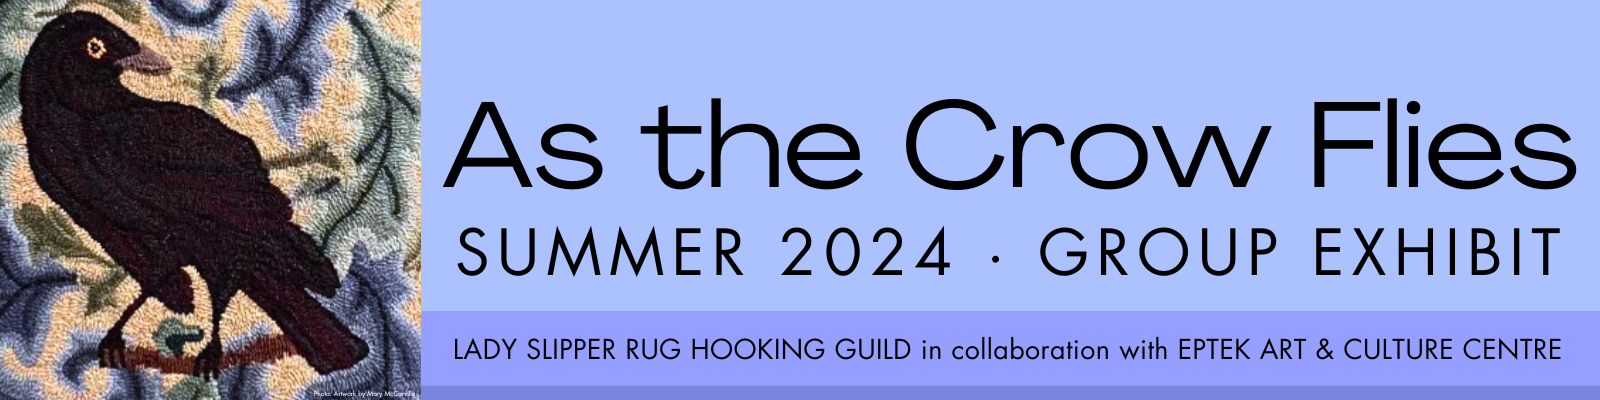 Banner for Eptek's 2024 Call For Submission, with text and a crow painting on the left side